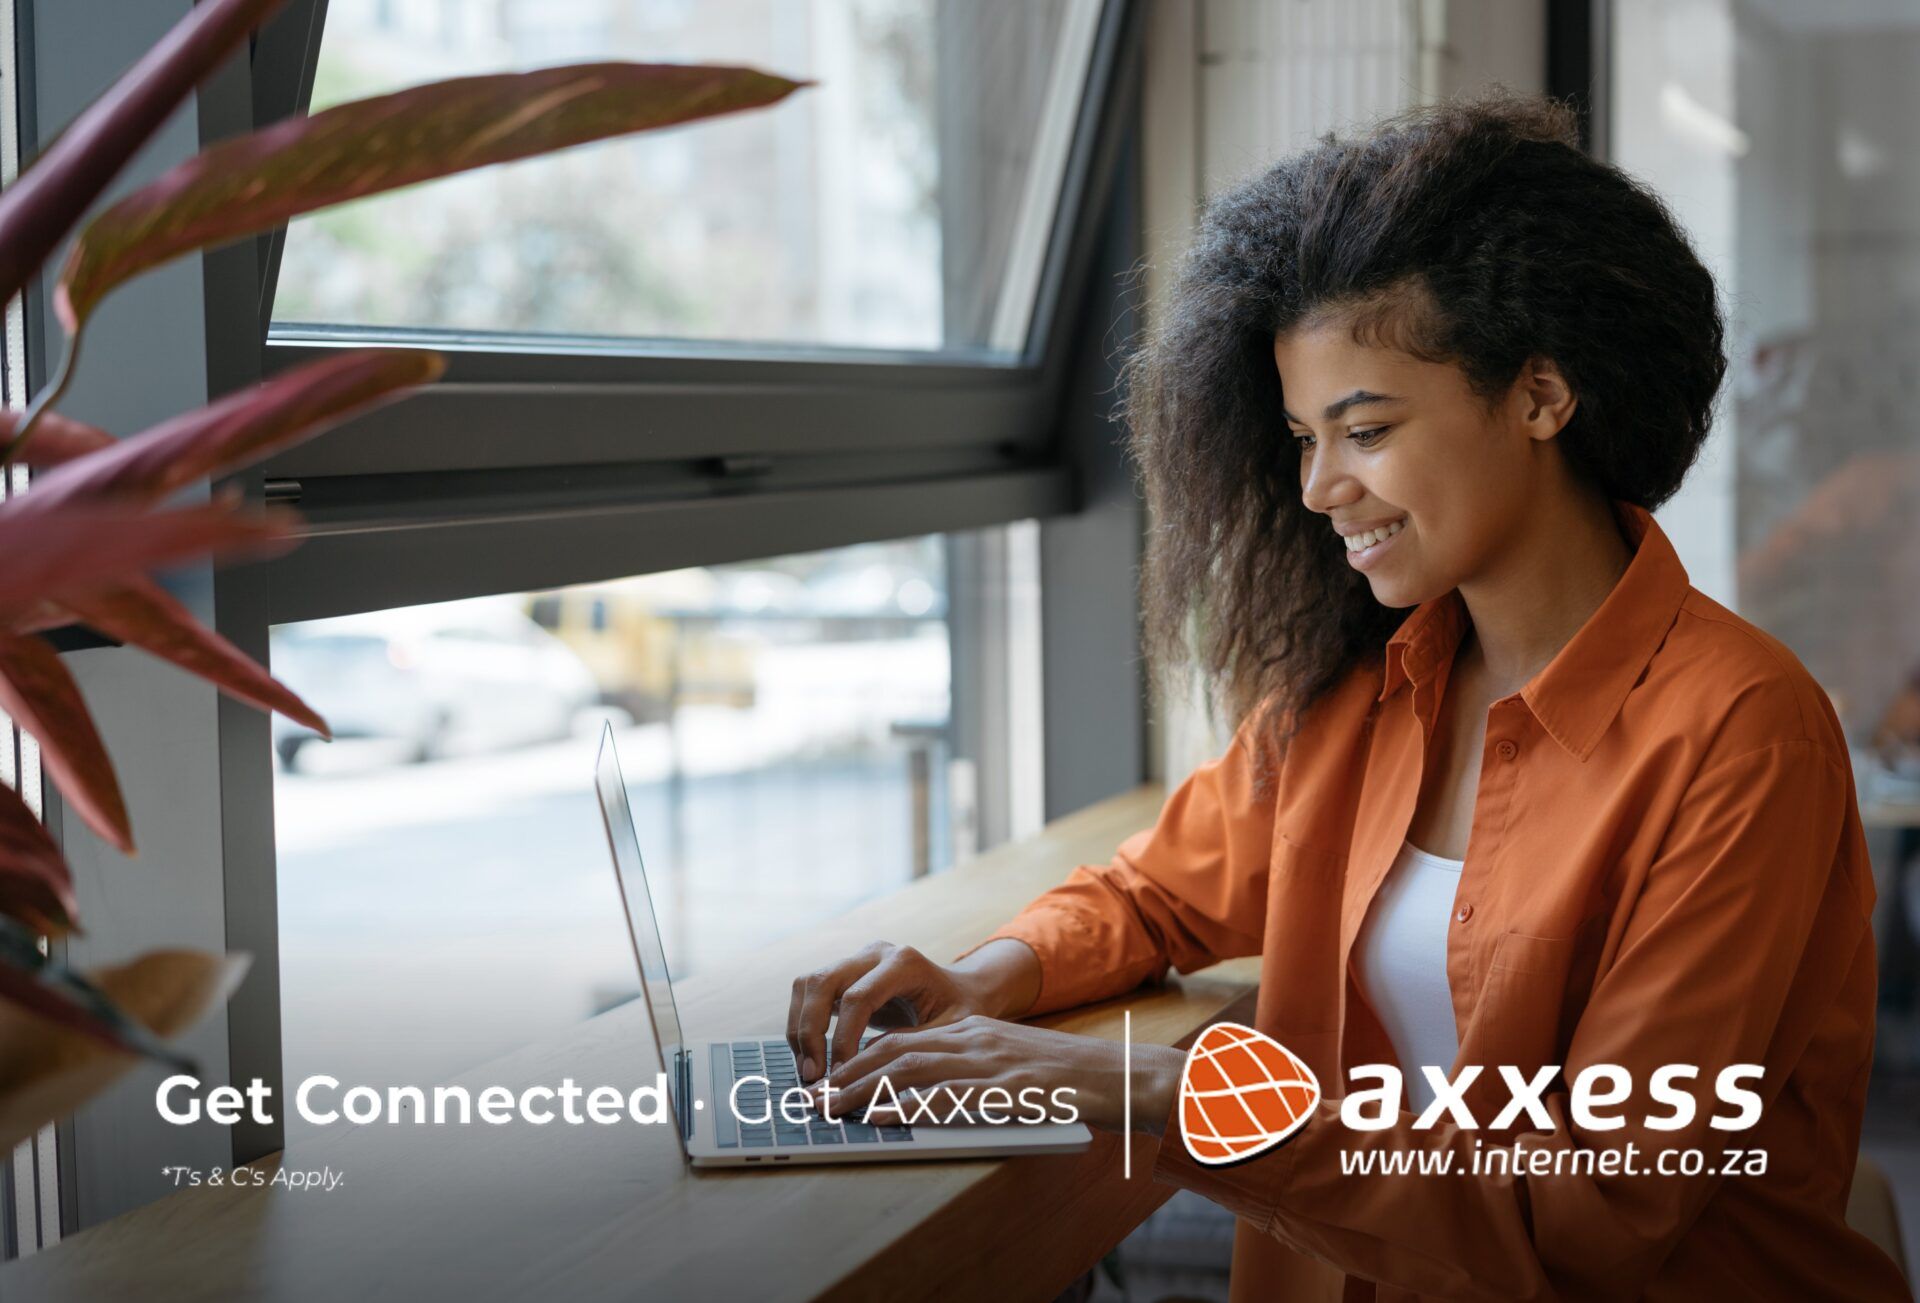 South African Broadband Provider, Axxess, Launches 5G Service